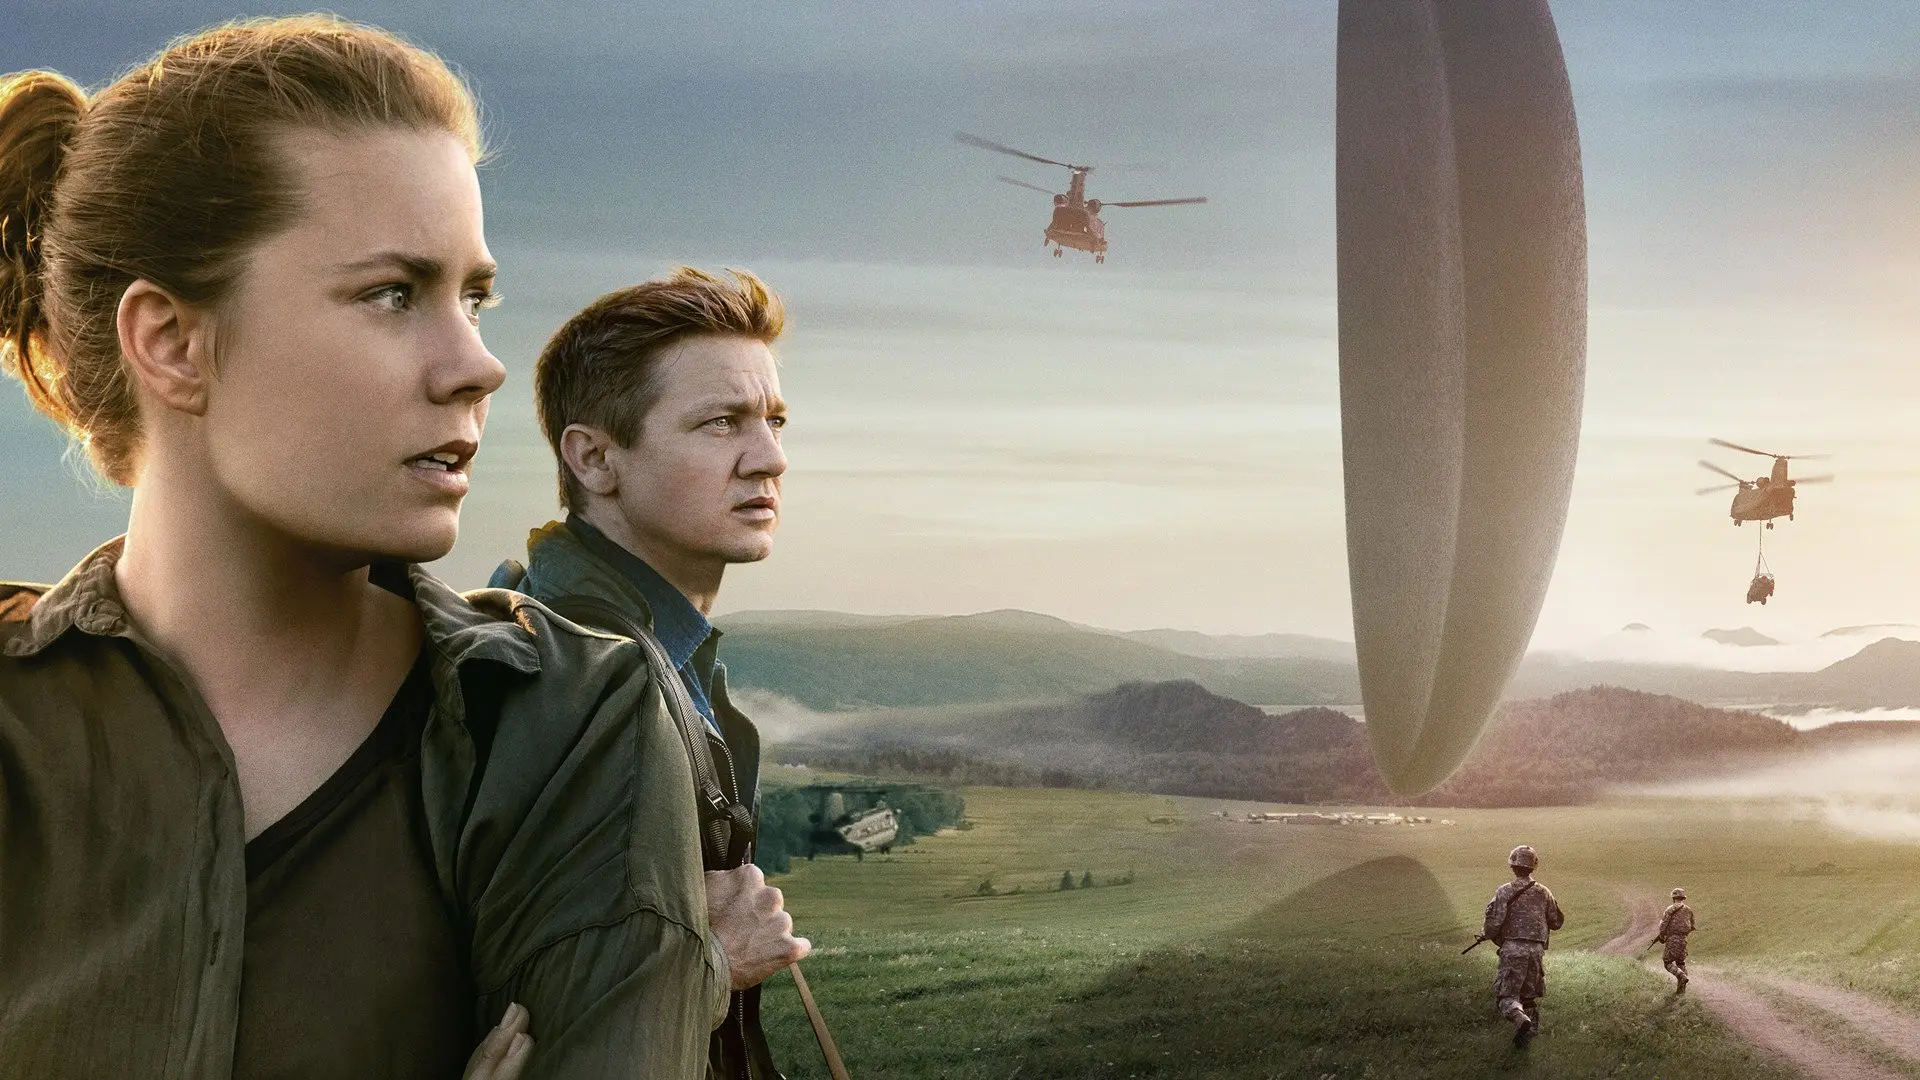 Arrival. (Paramount Pictures)